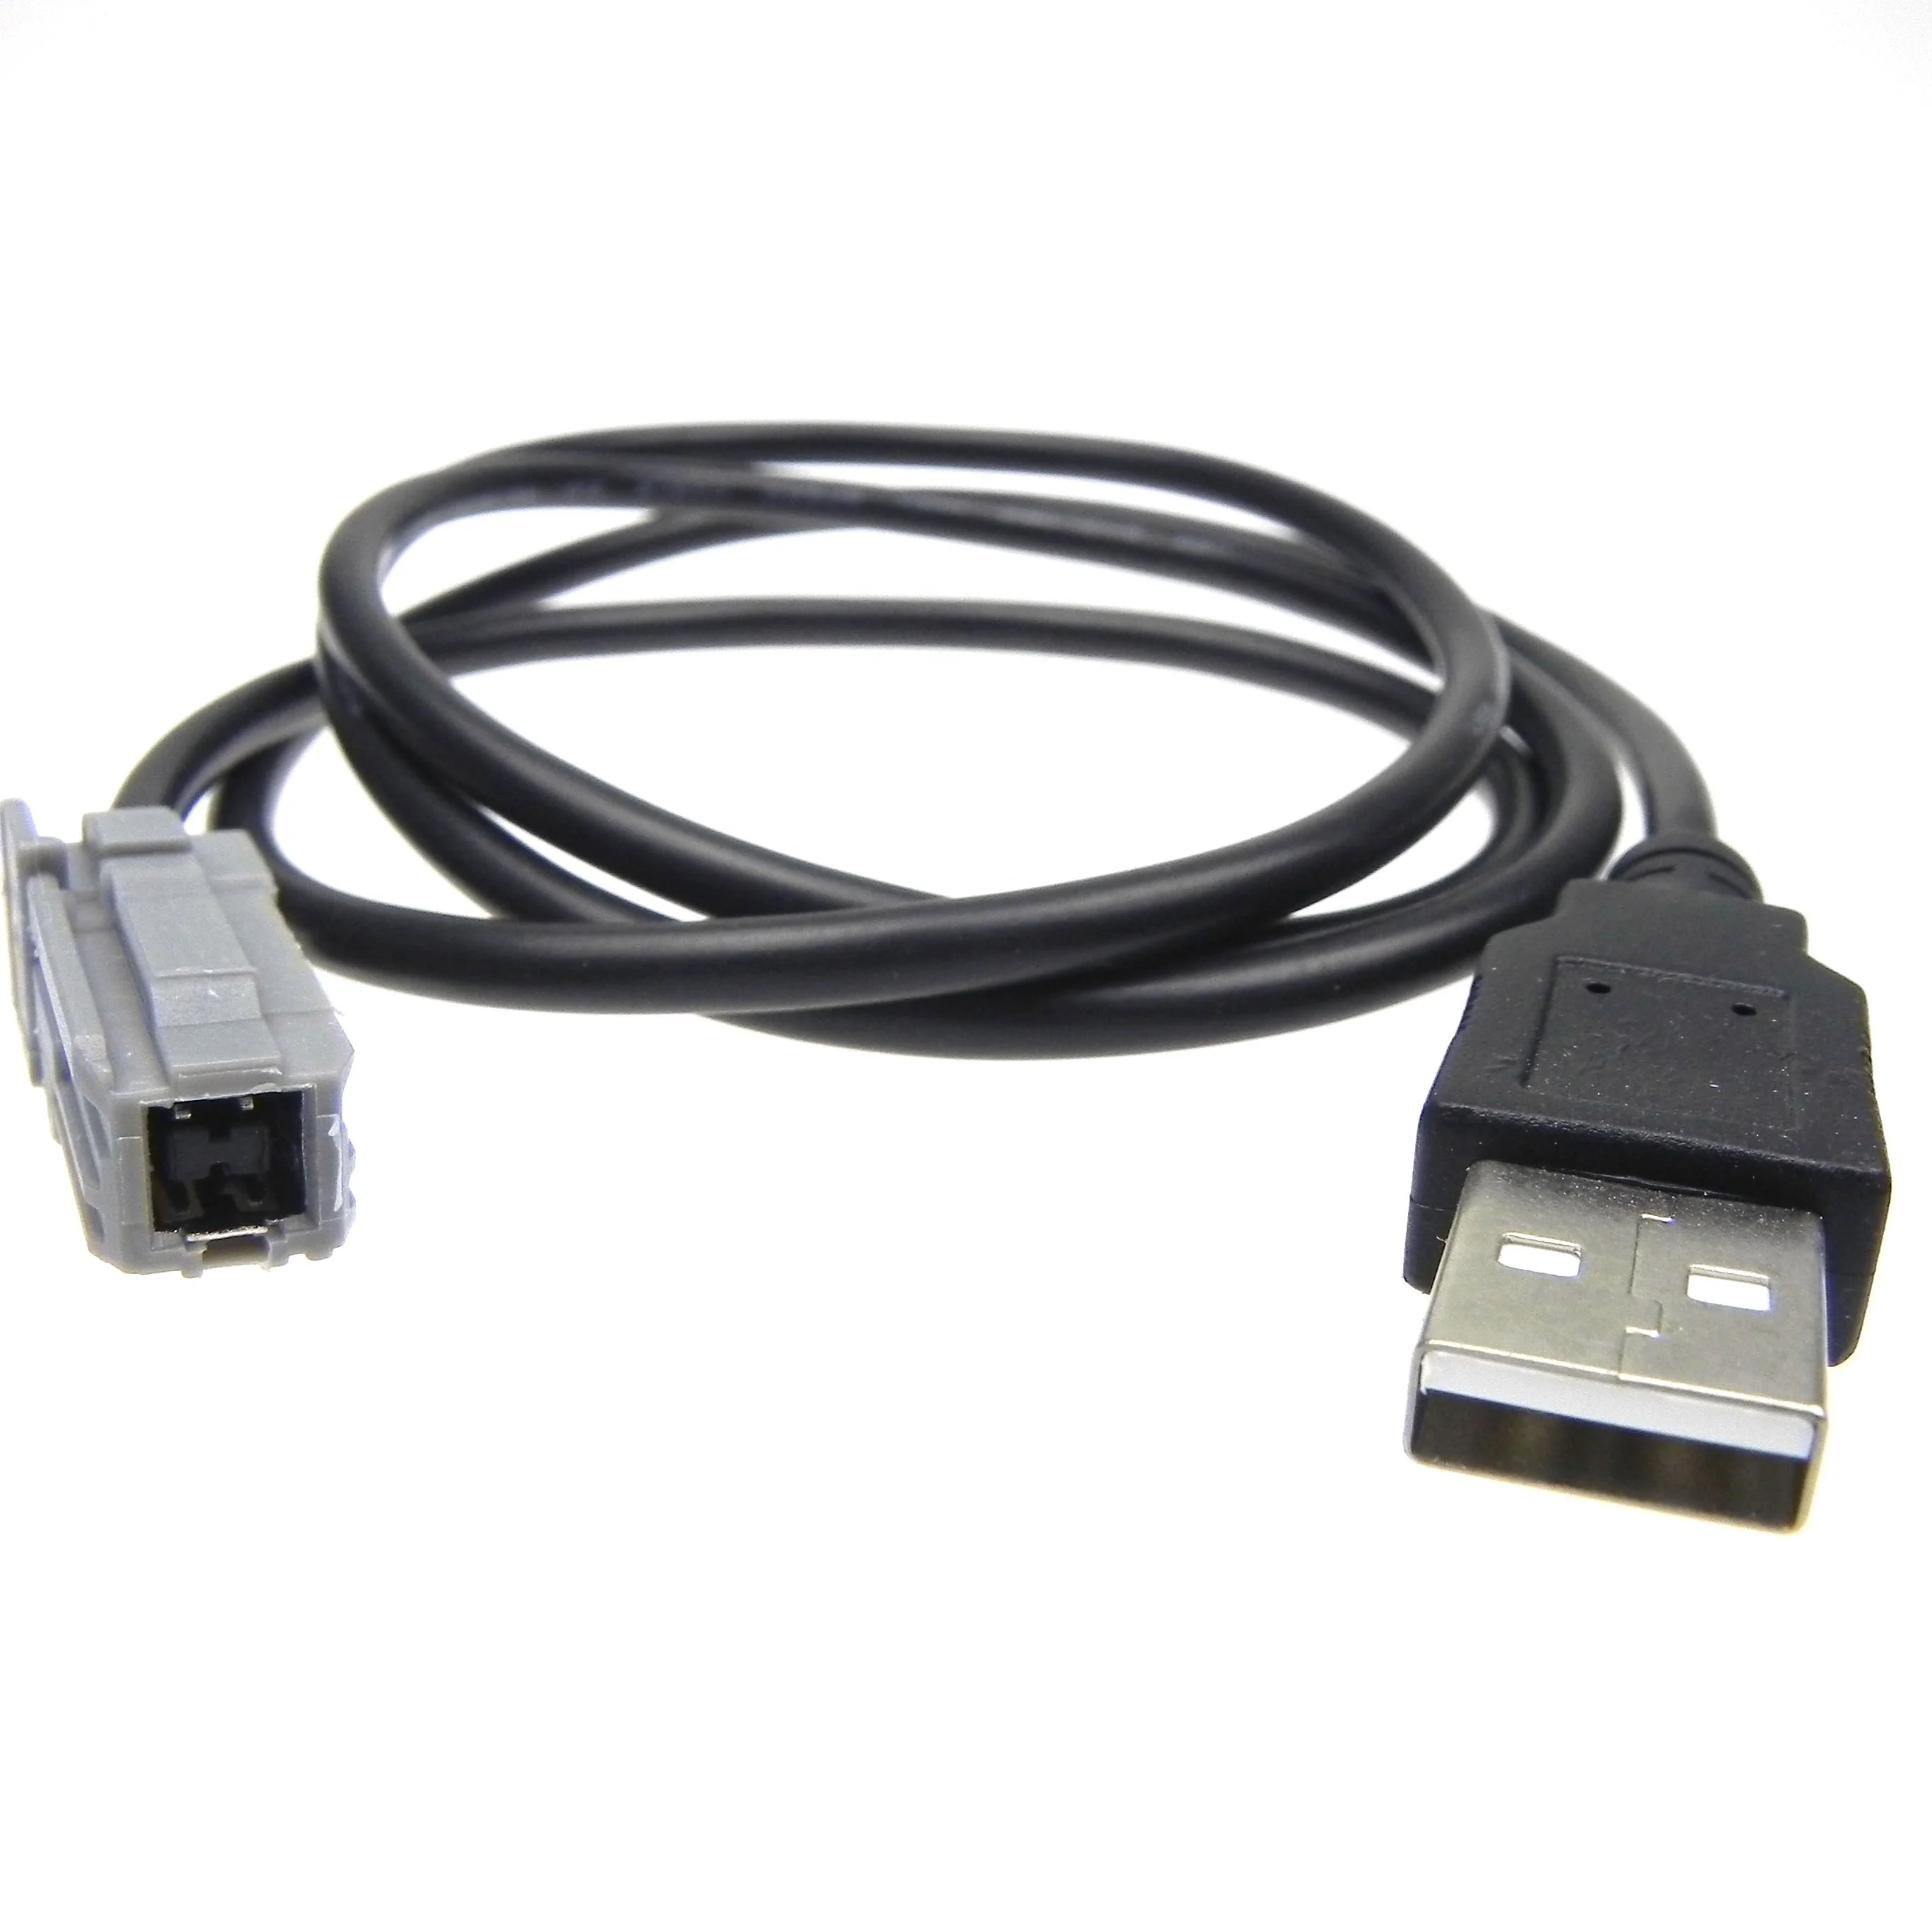 

Mazur Toyota Reiz Camry Mazda Subaru Forester Ling Pai Nissan USB to Male connection USB audio cable